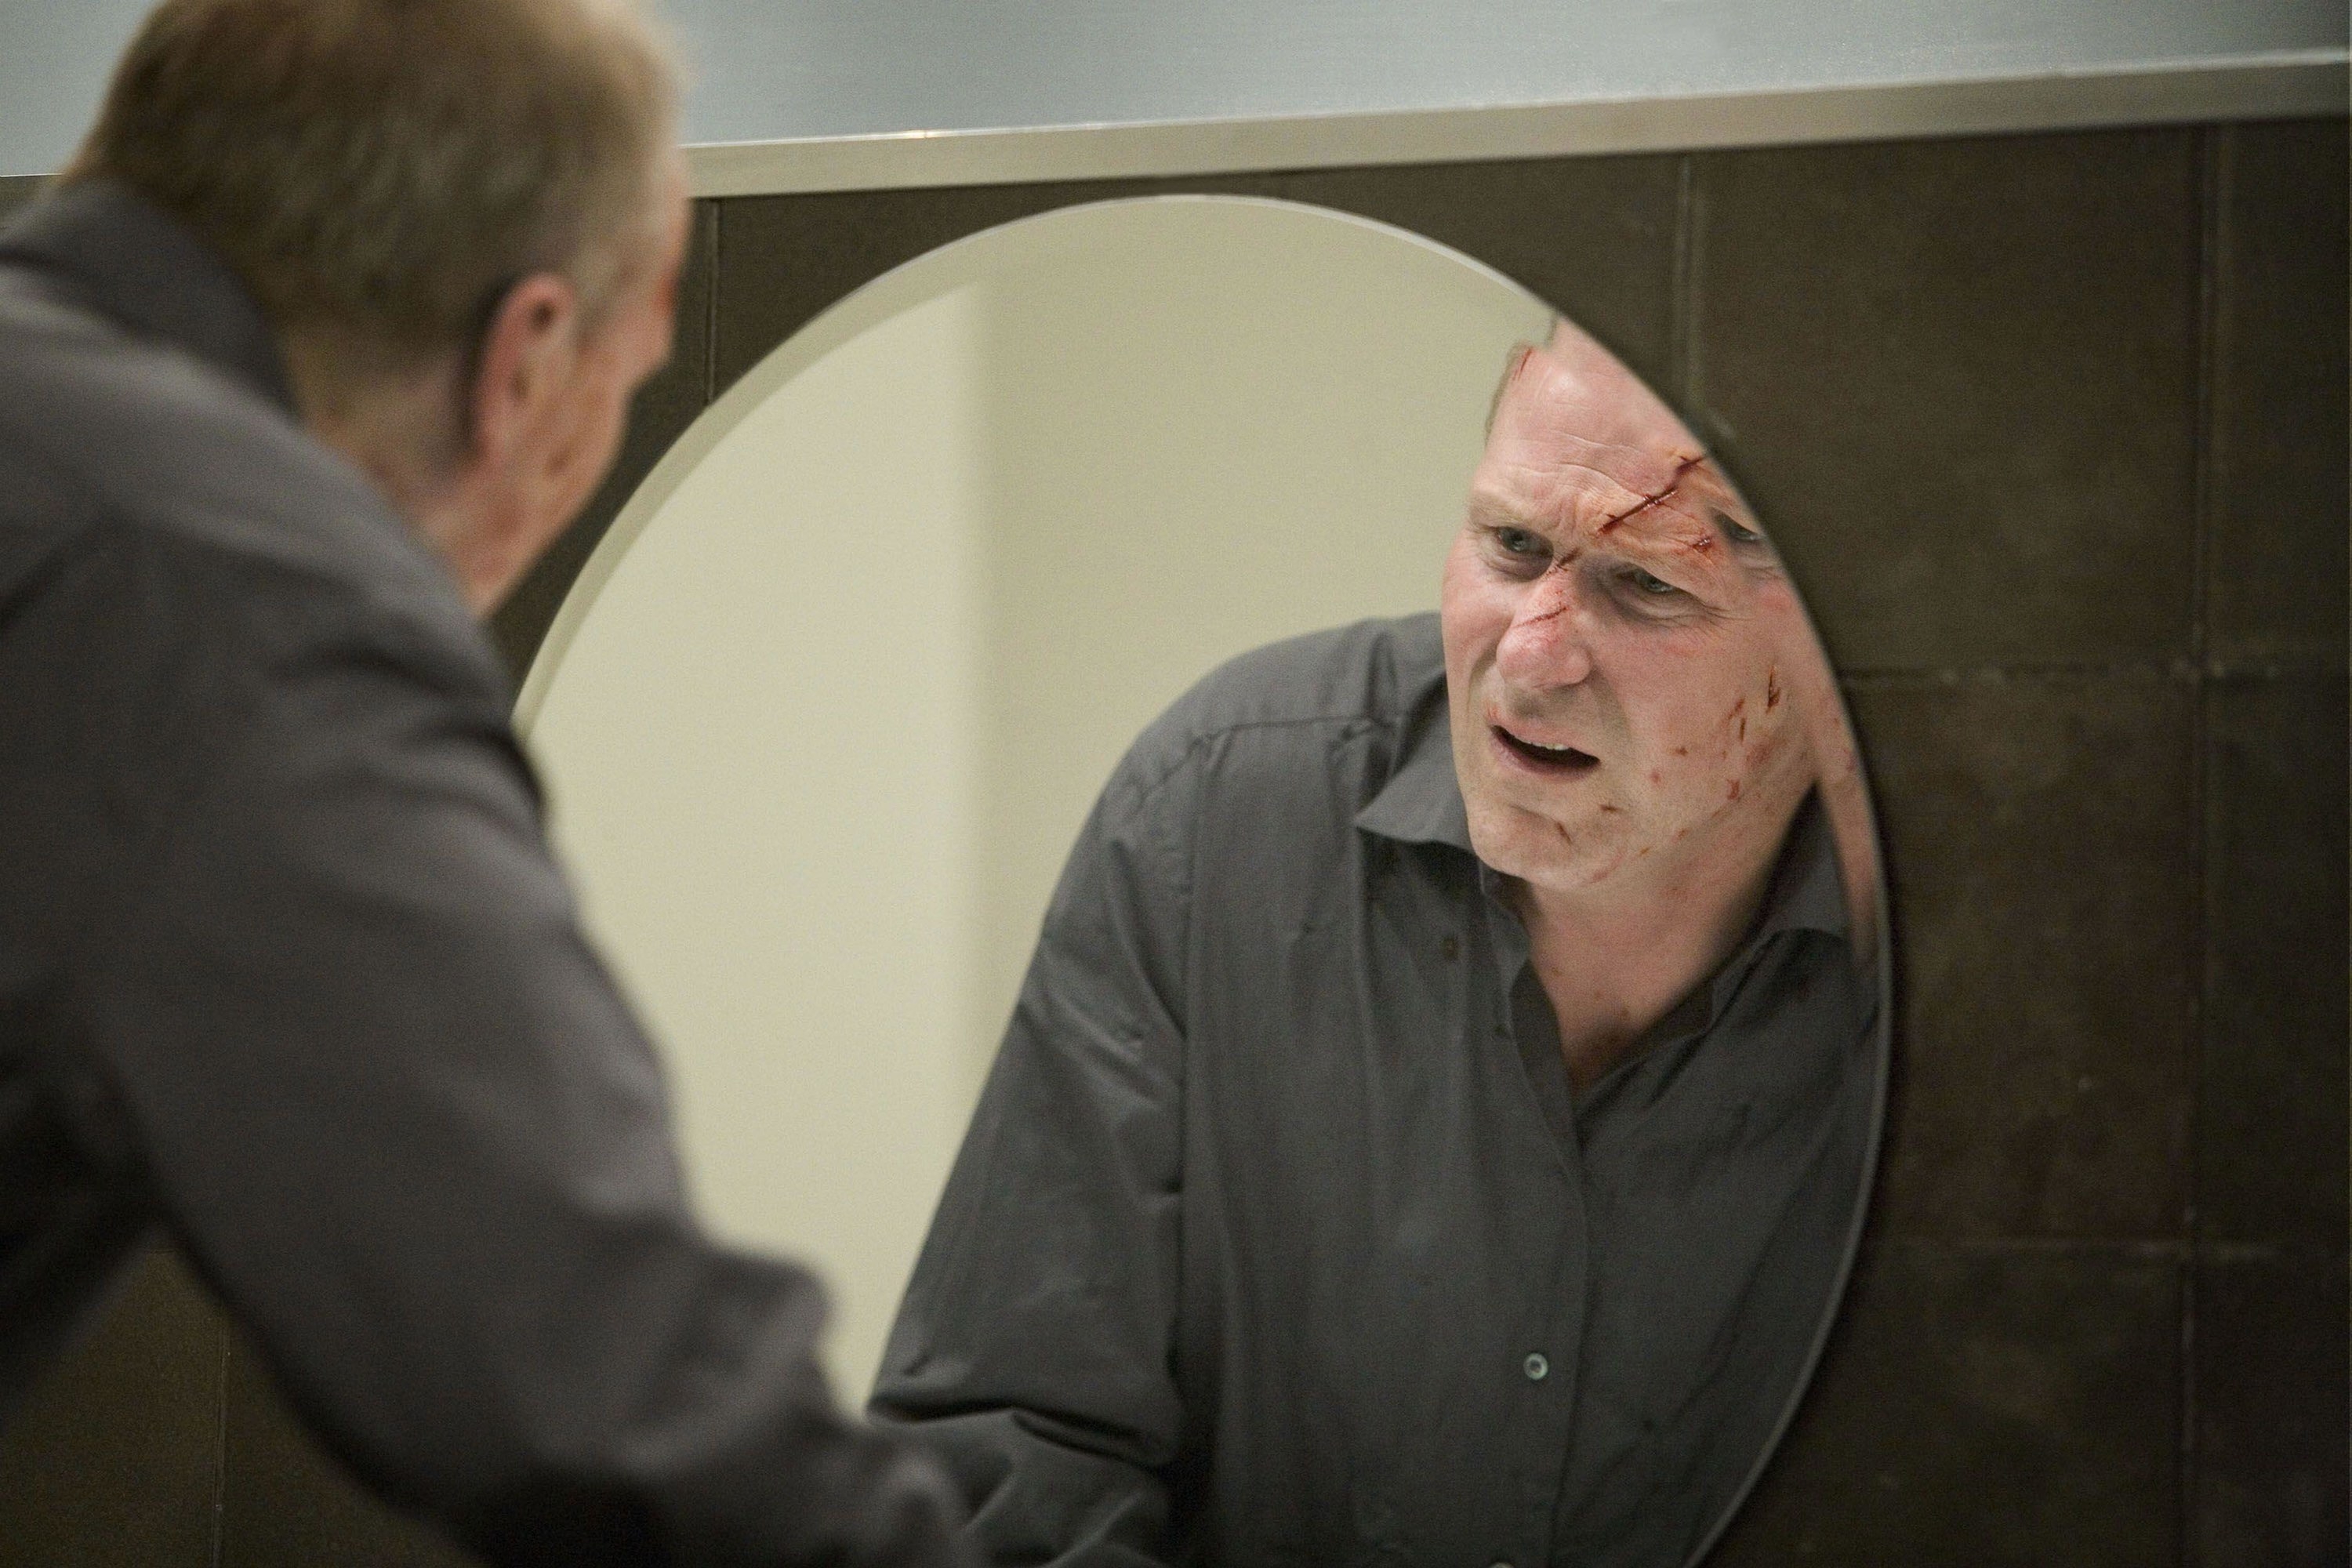 An injured man examines his facial wounds in a mirror